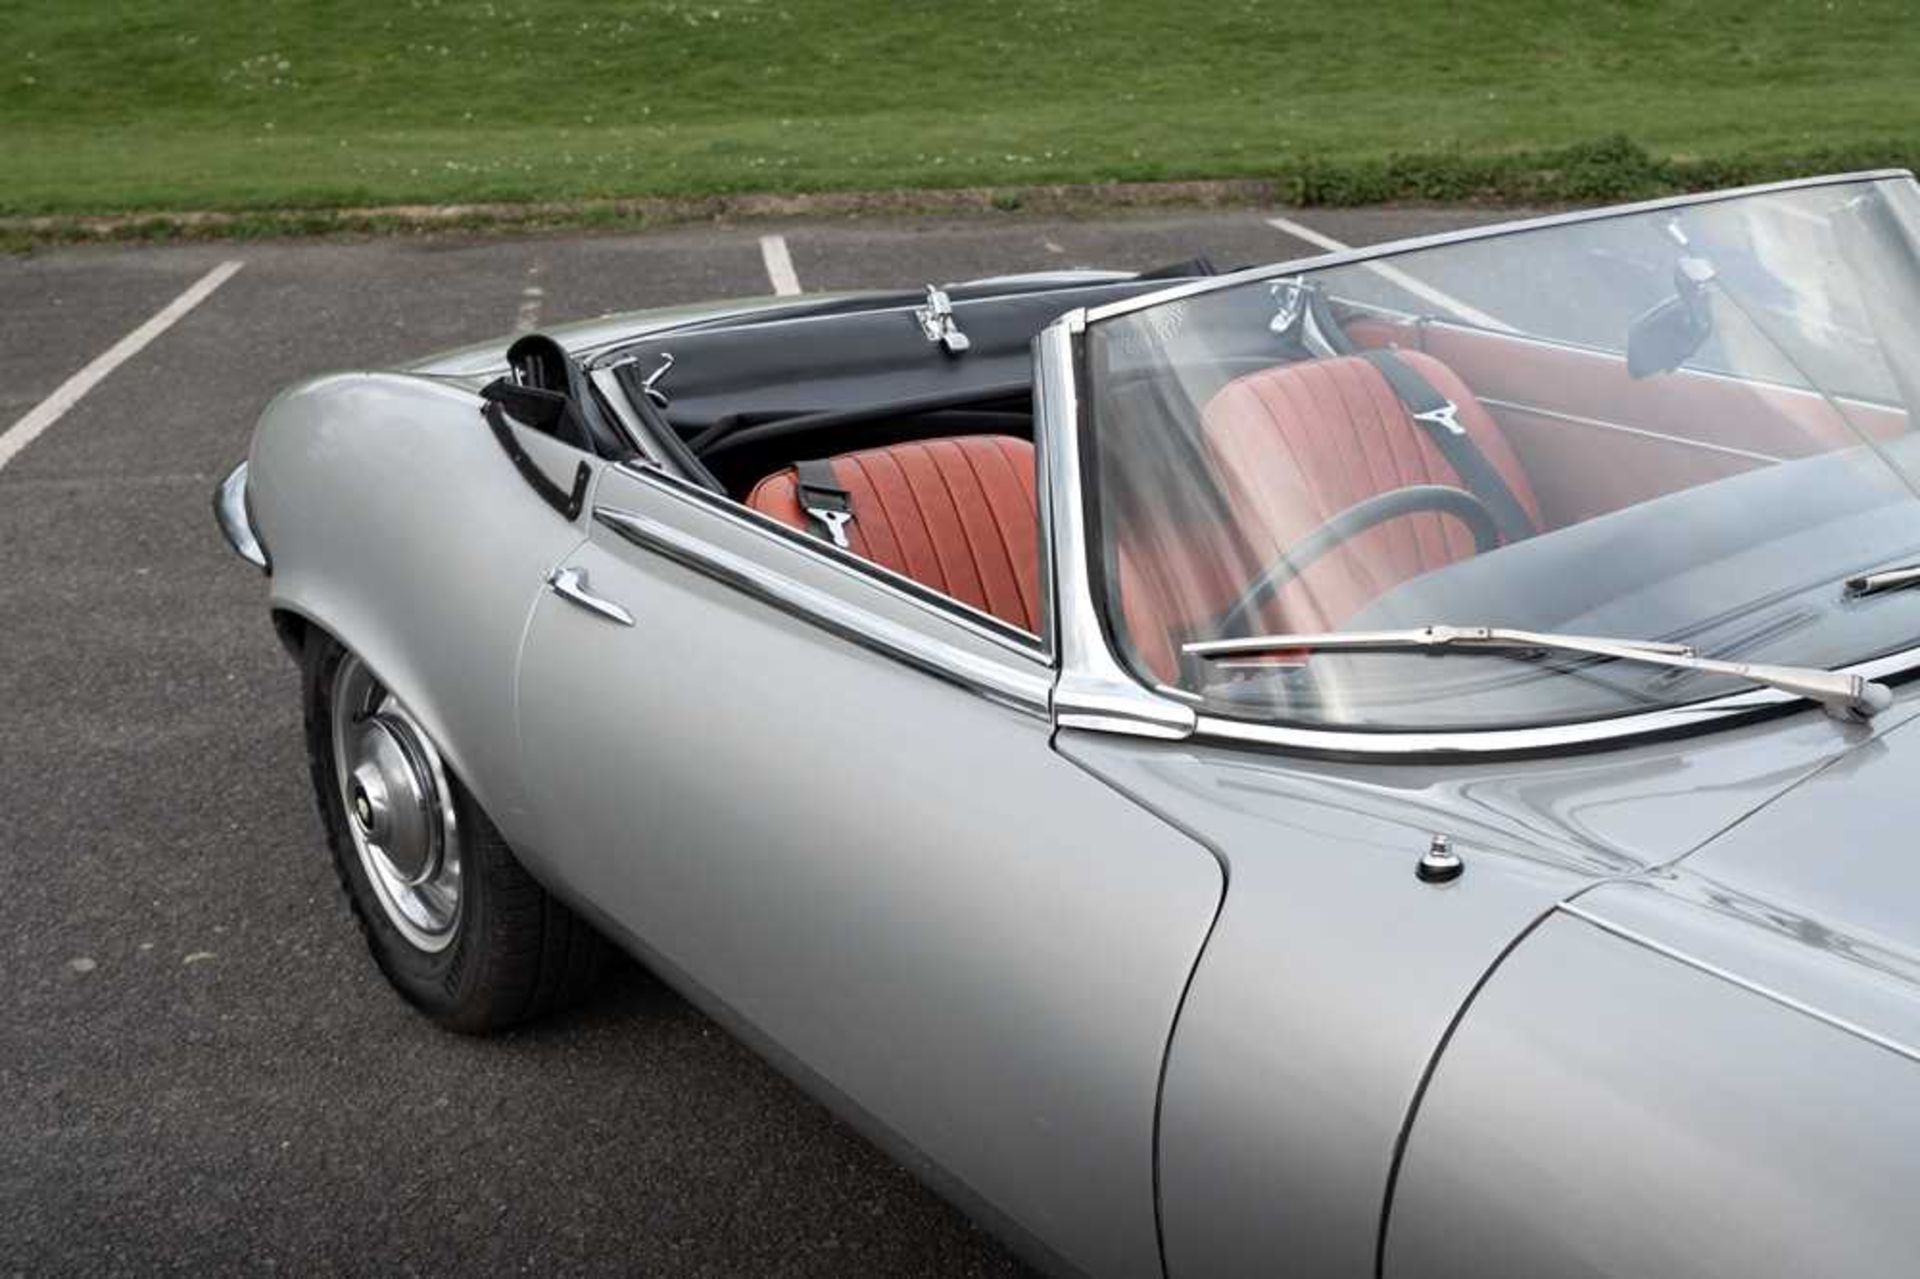 1974 Jaguar E-Type Series III V12 Roadster Only one family owner and 54,412 miles from new - Image 69 of 89